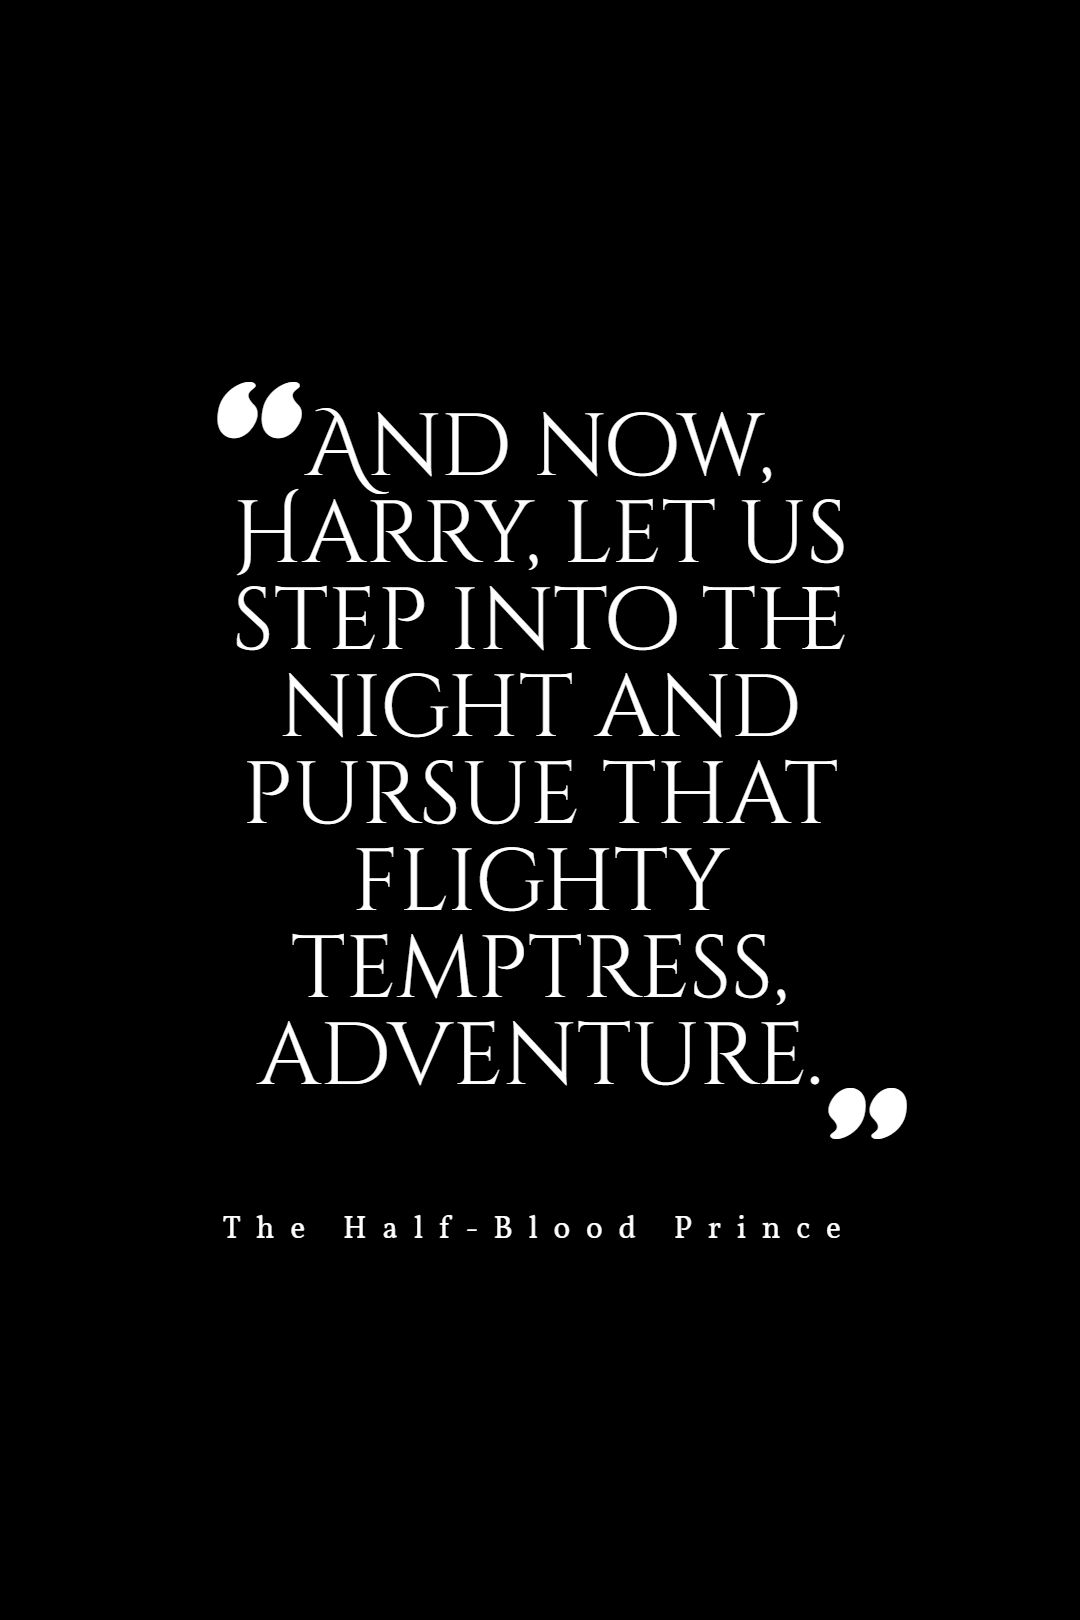 And now Harry let us step into the night and pursue that flighty temptress adventure.